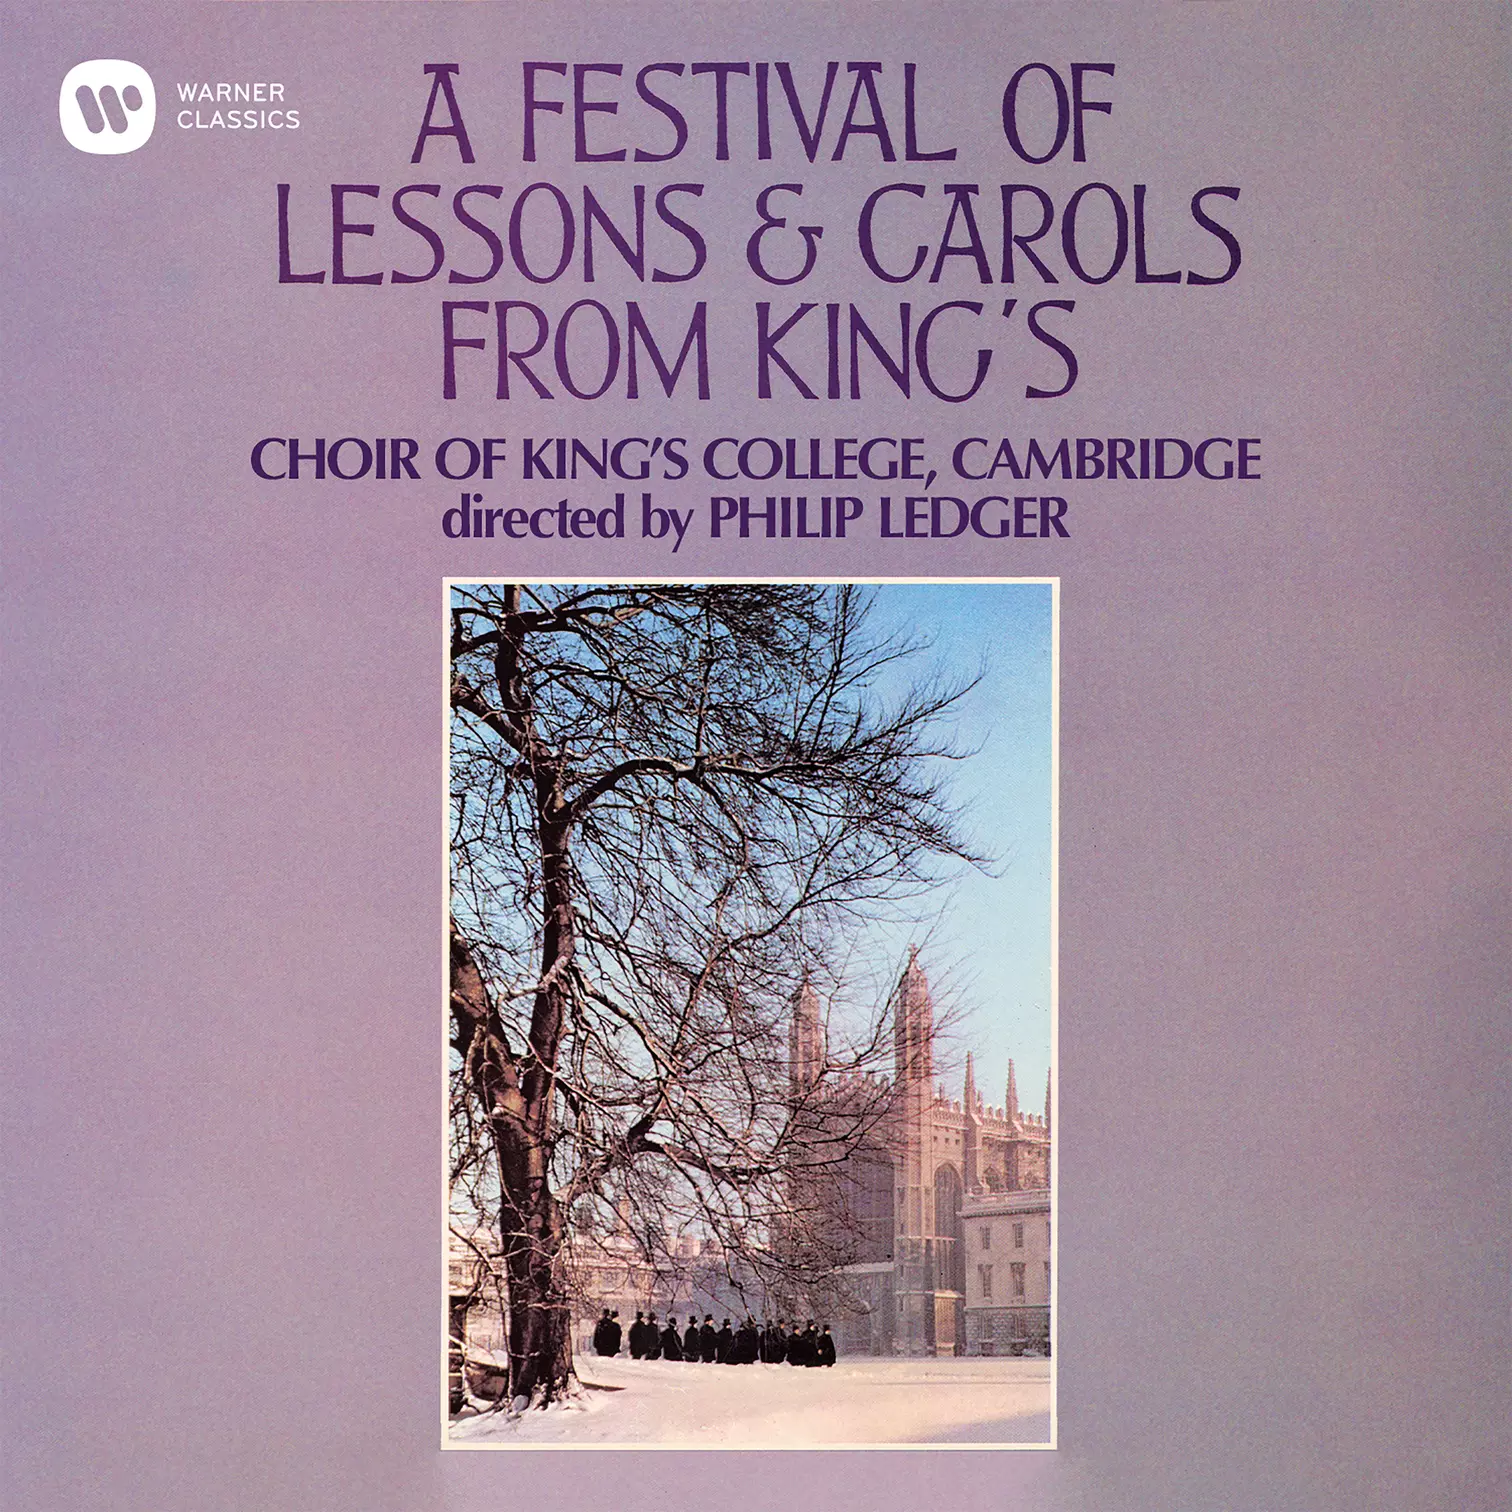 A Festival of Lessons & Carols from King’s